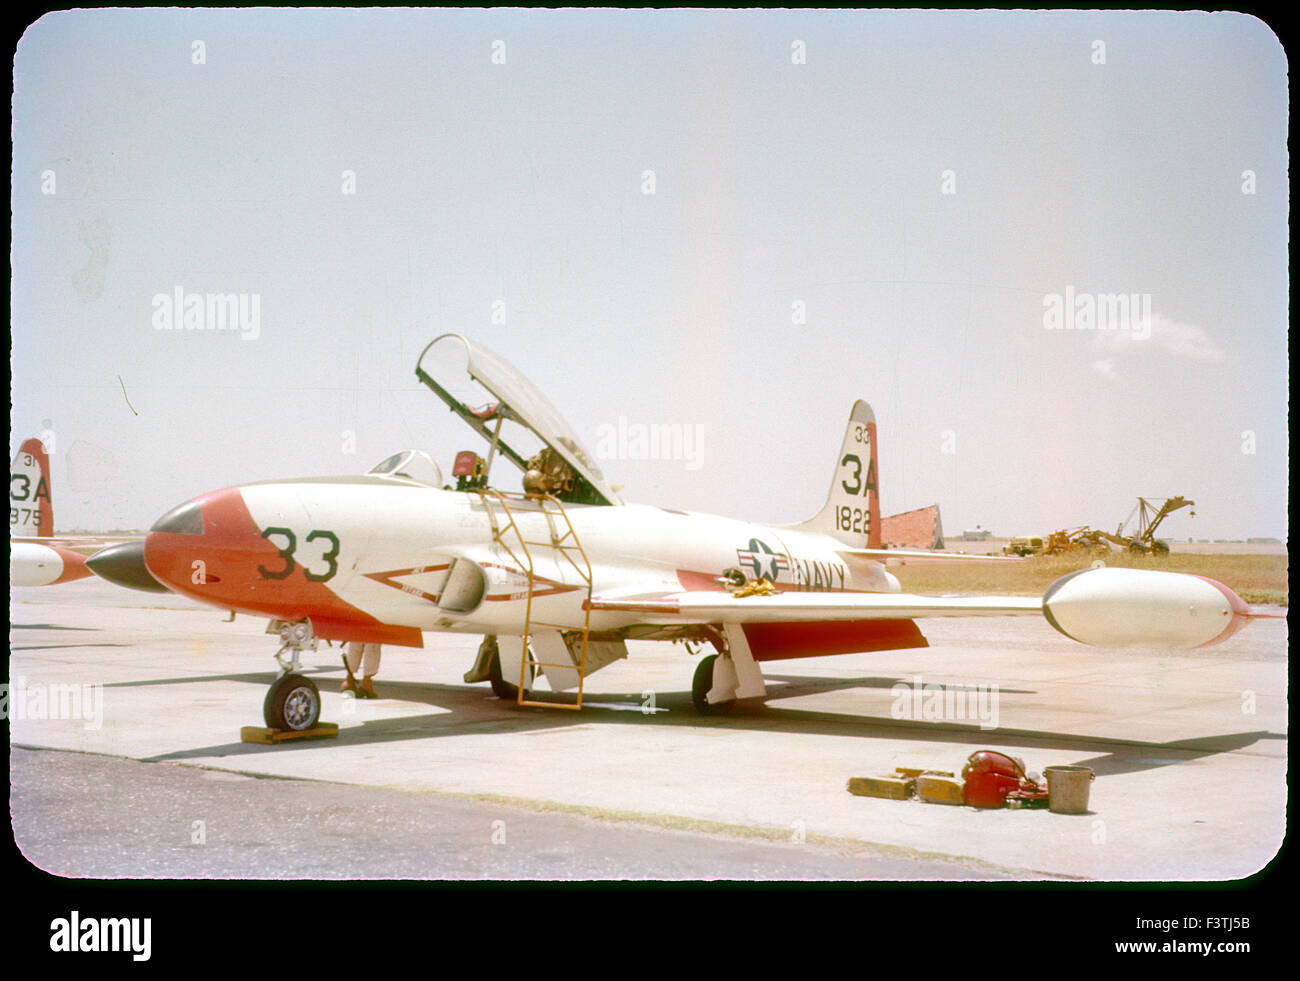 T-33 trainer Corpus Christi, Texas. United States Navy Banque D'Images